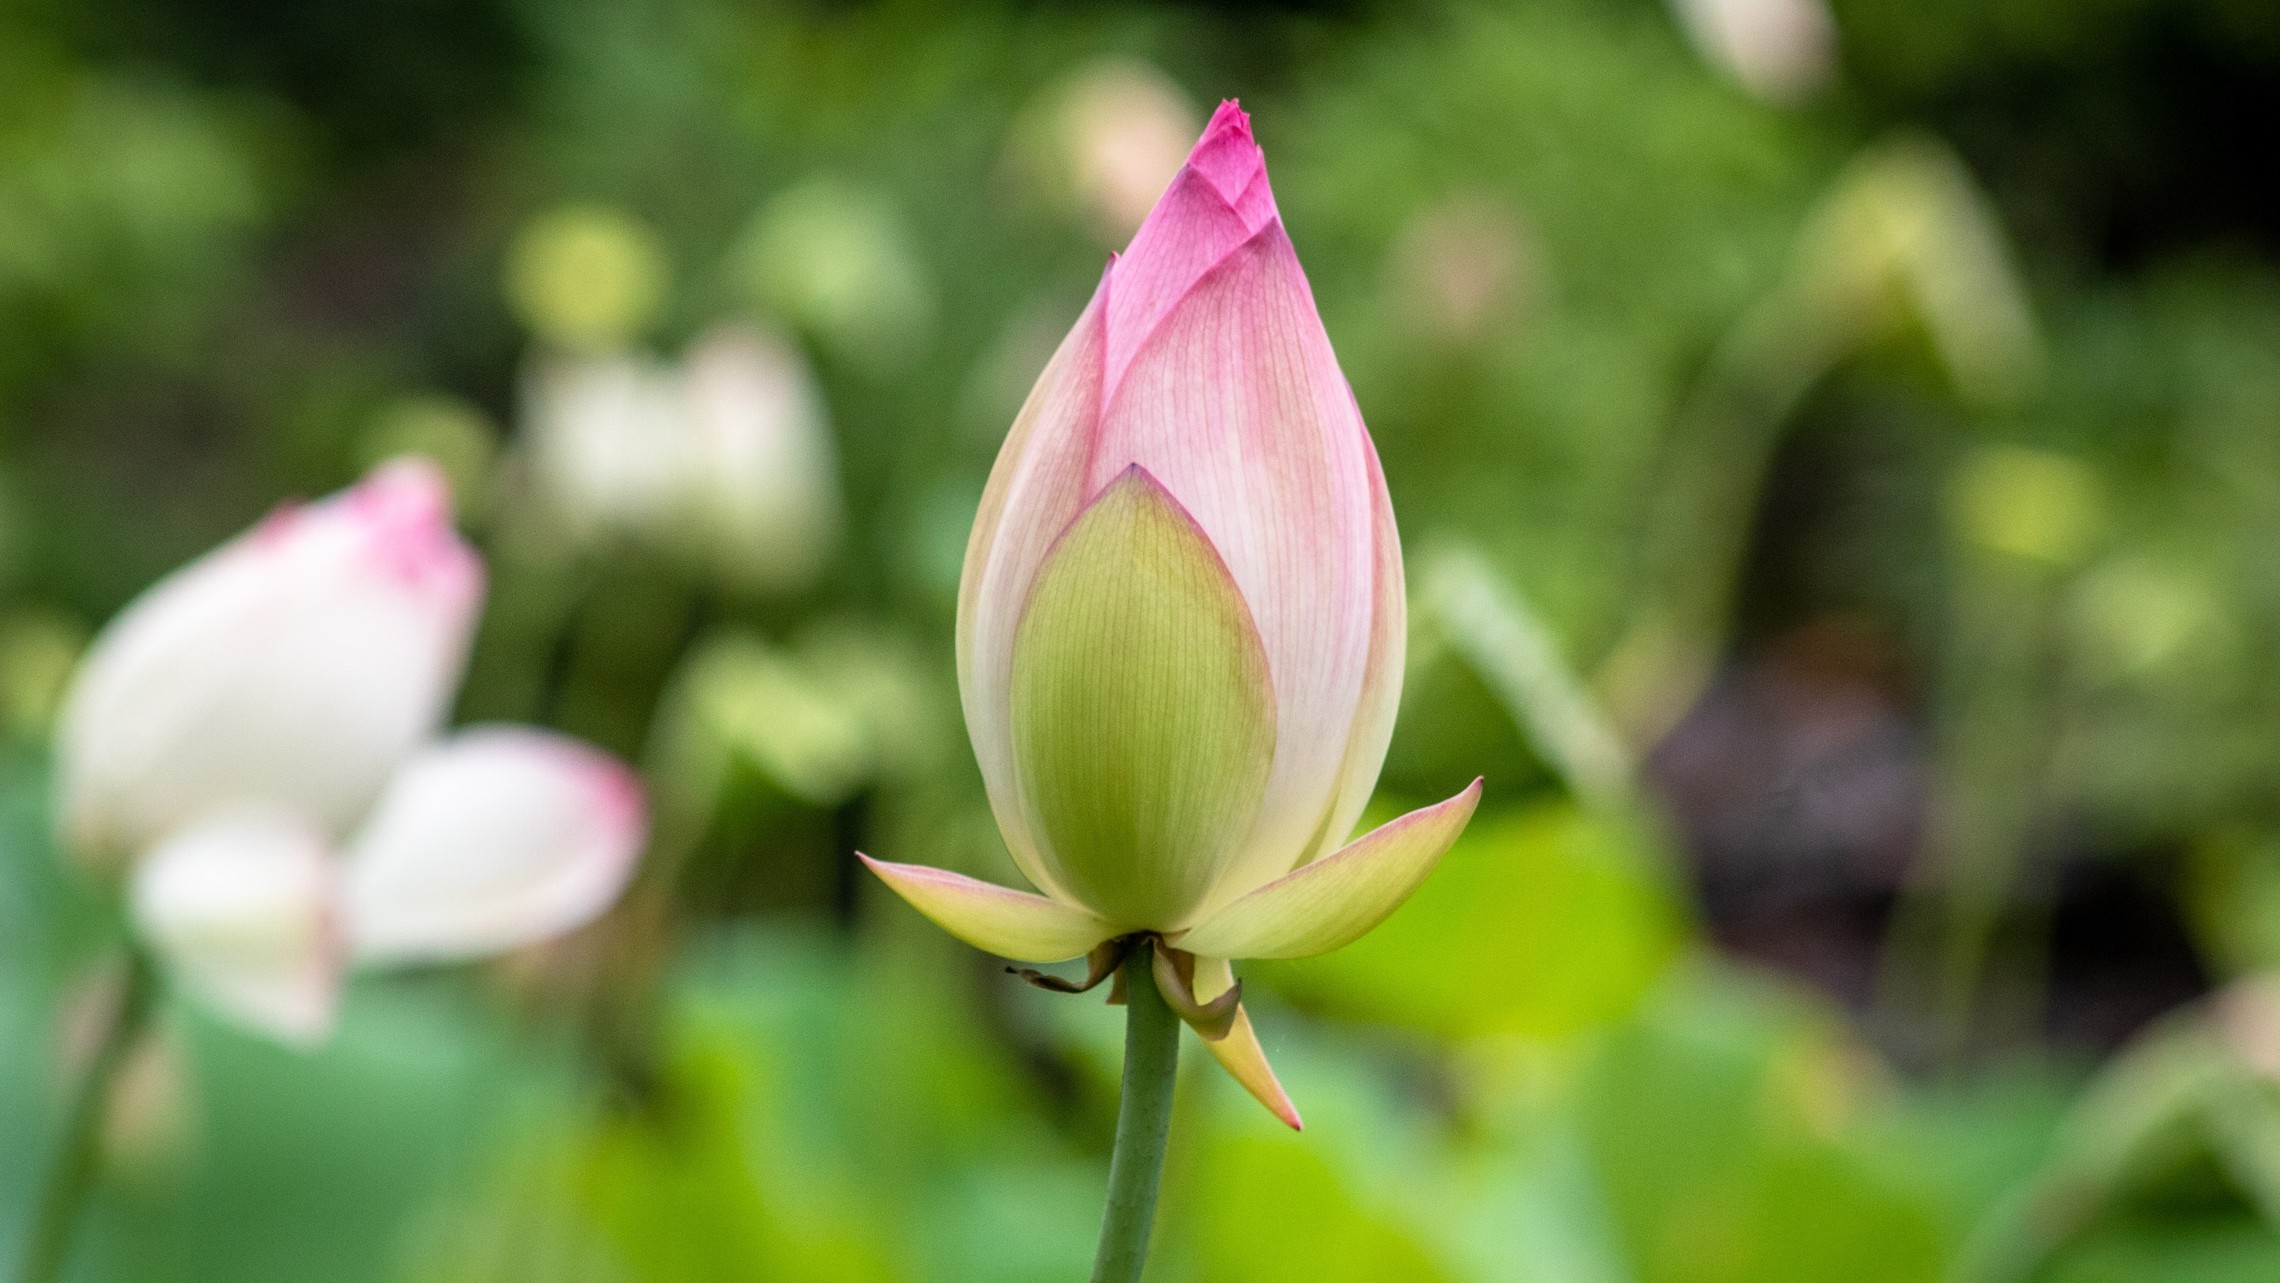 pink flower in the bud stage